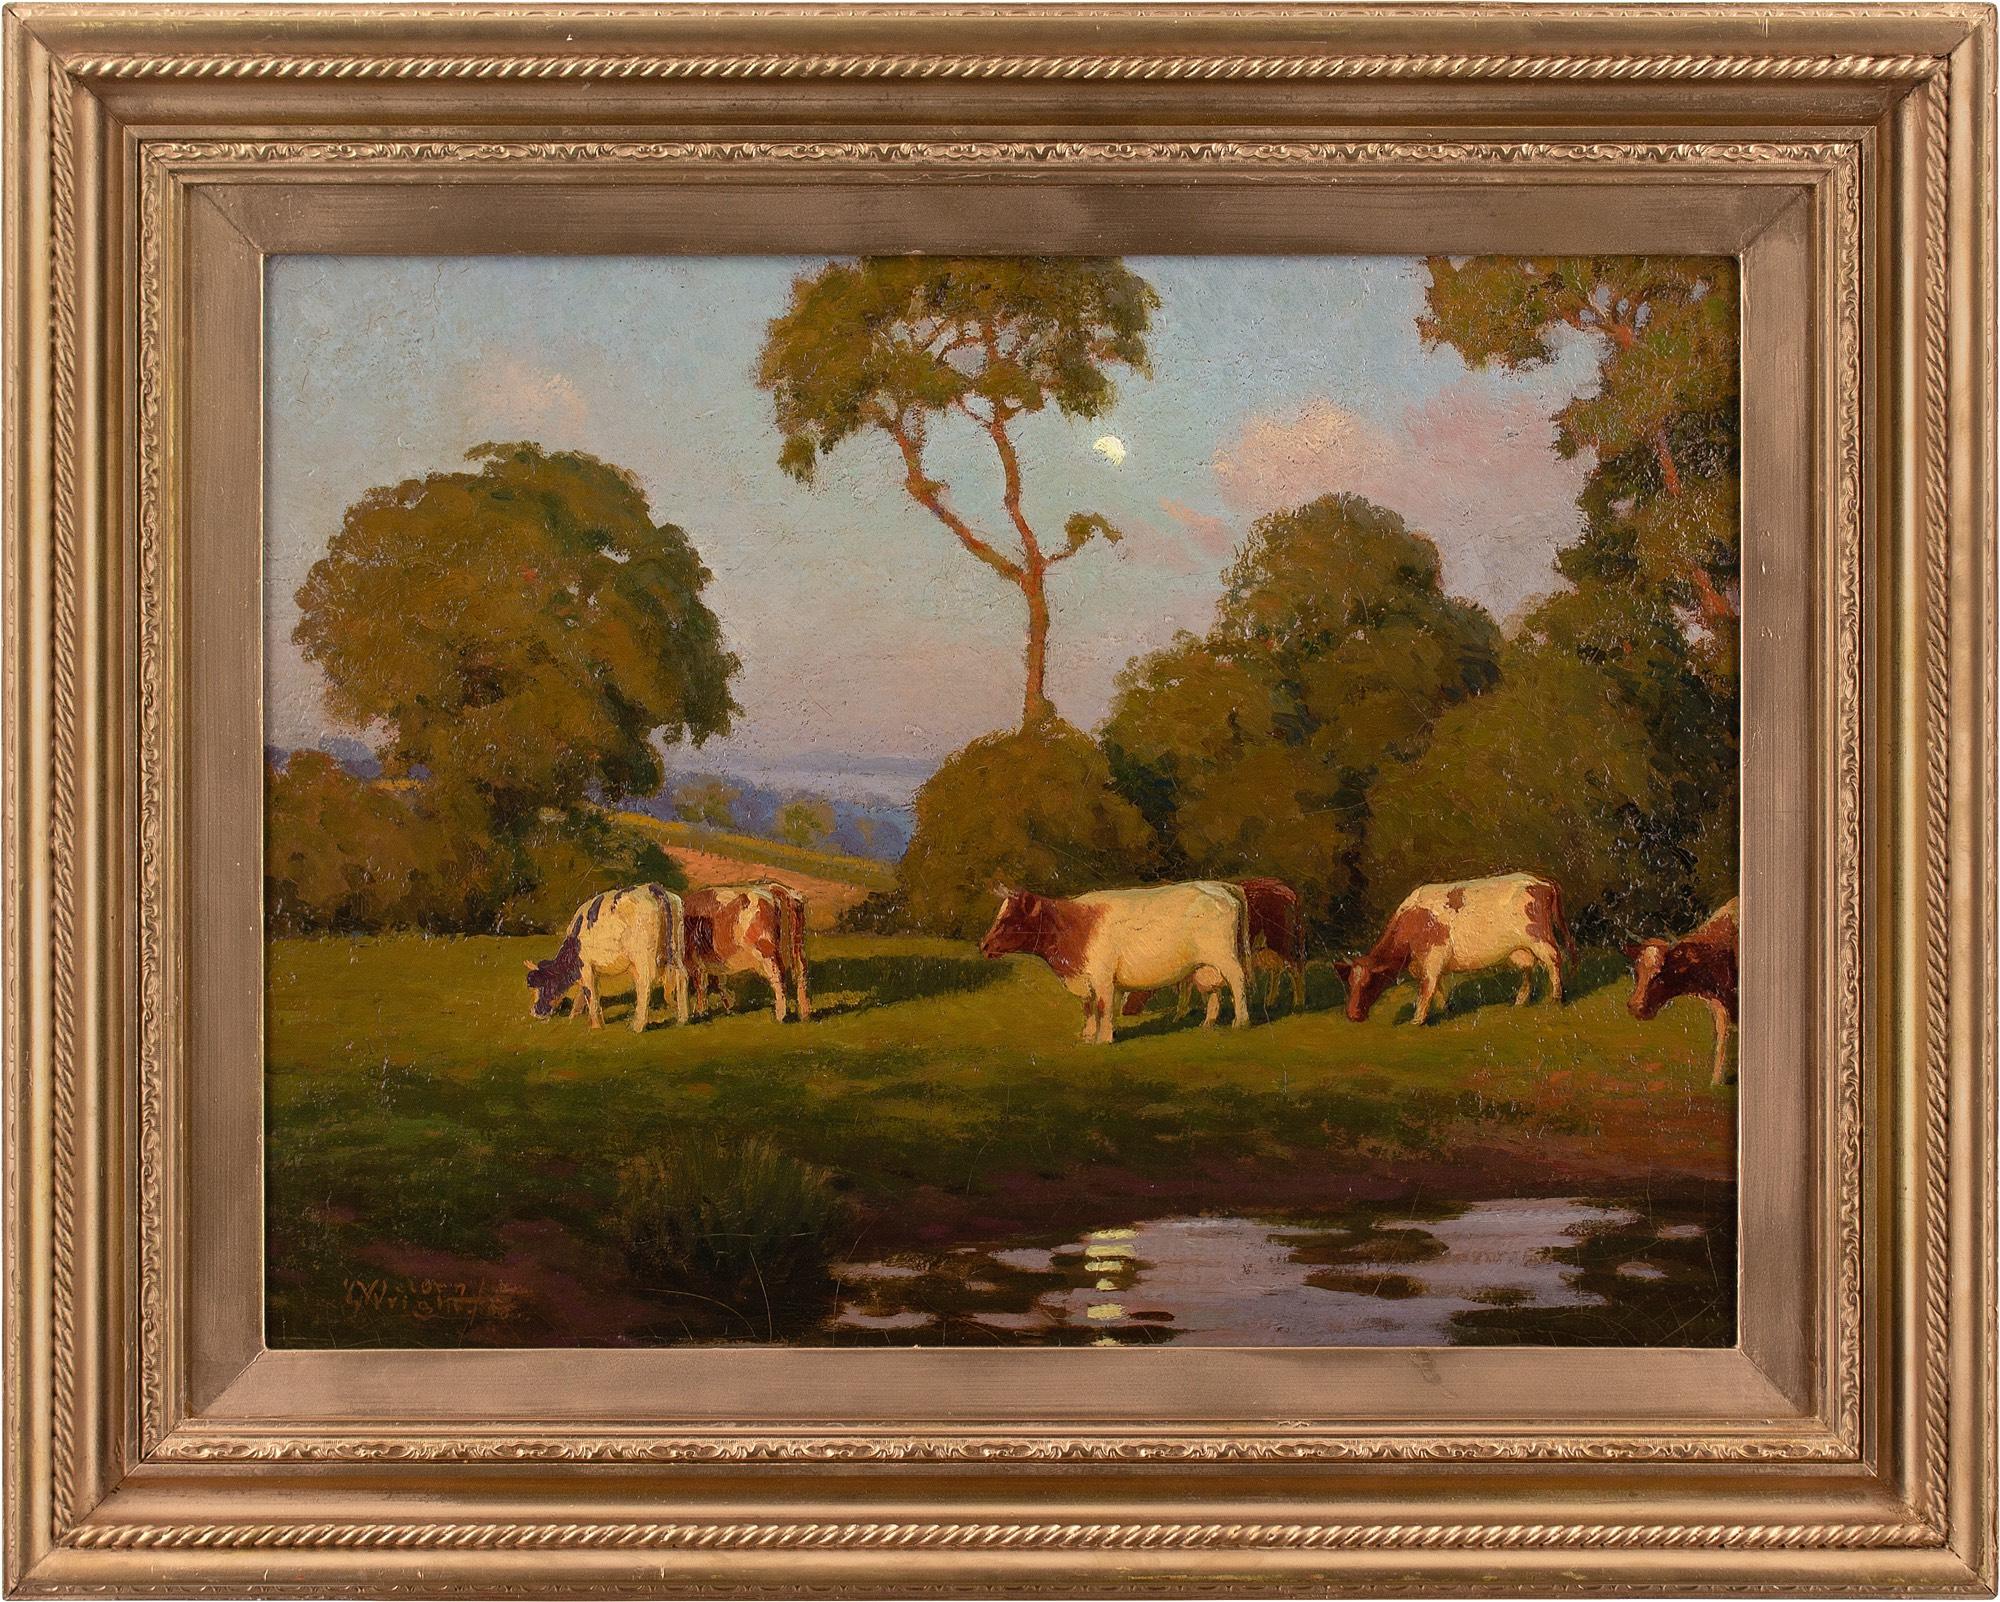 This early 20th-century oil on canvas by British artist Nelson Wright (1880-1930) depicts several cattle grazing alongside a shimmering pond. It’s a tranquil Summer’s day in the English countryside.

Works by this artist are hard to track down but